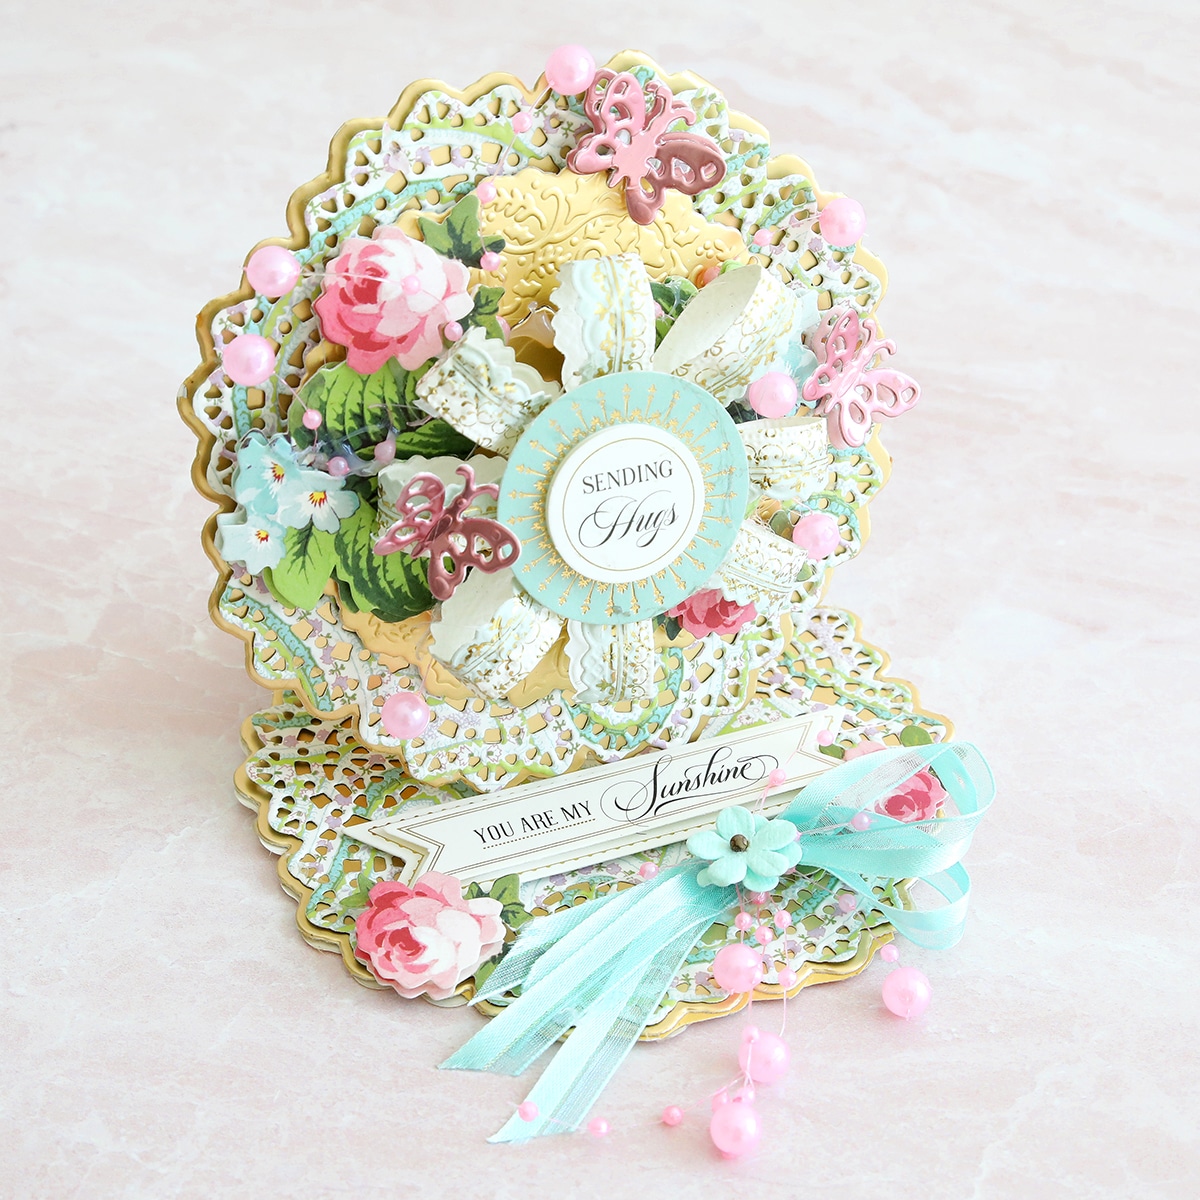 A card with flowers and ribbons on it.